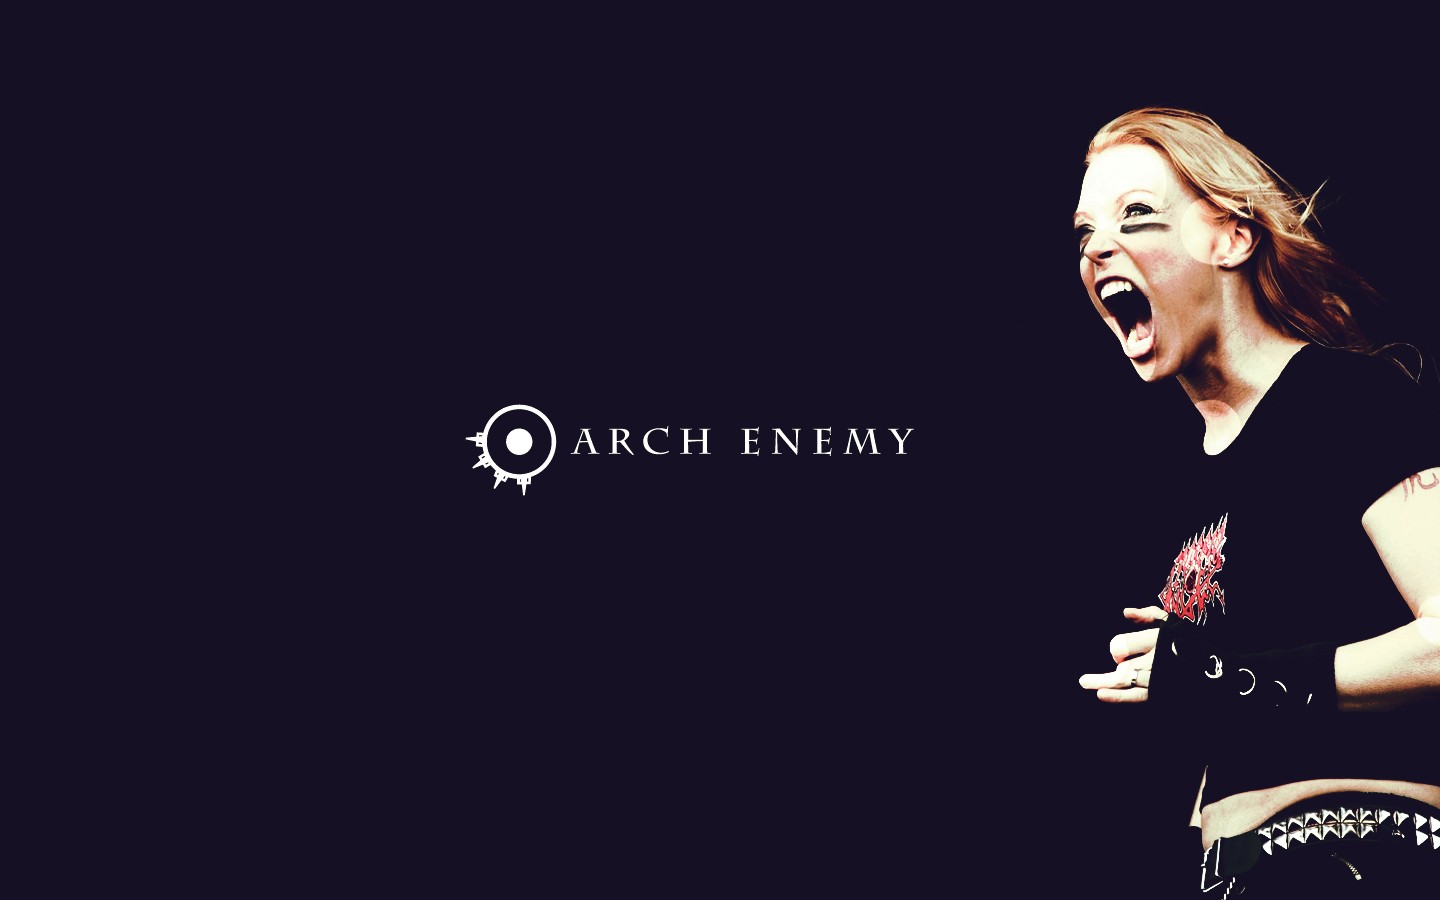 arch, Enemy, Groups, Bands, Heavy, Metal, Death, Hard, Rock, Music, Entertainment, Angela, Gossow, Album, Covers, Blondes, Women, Females Wallpaper